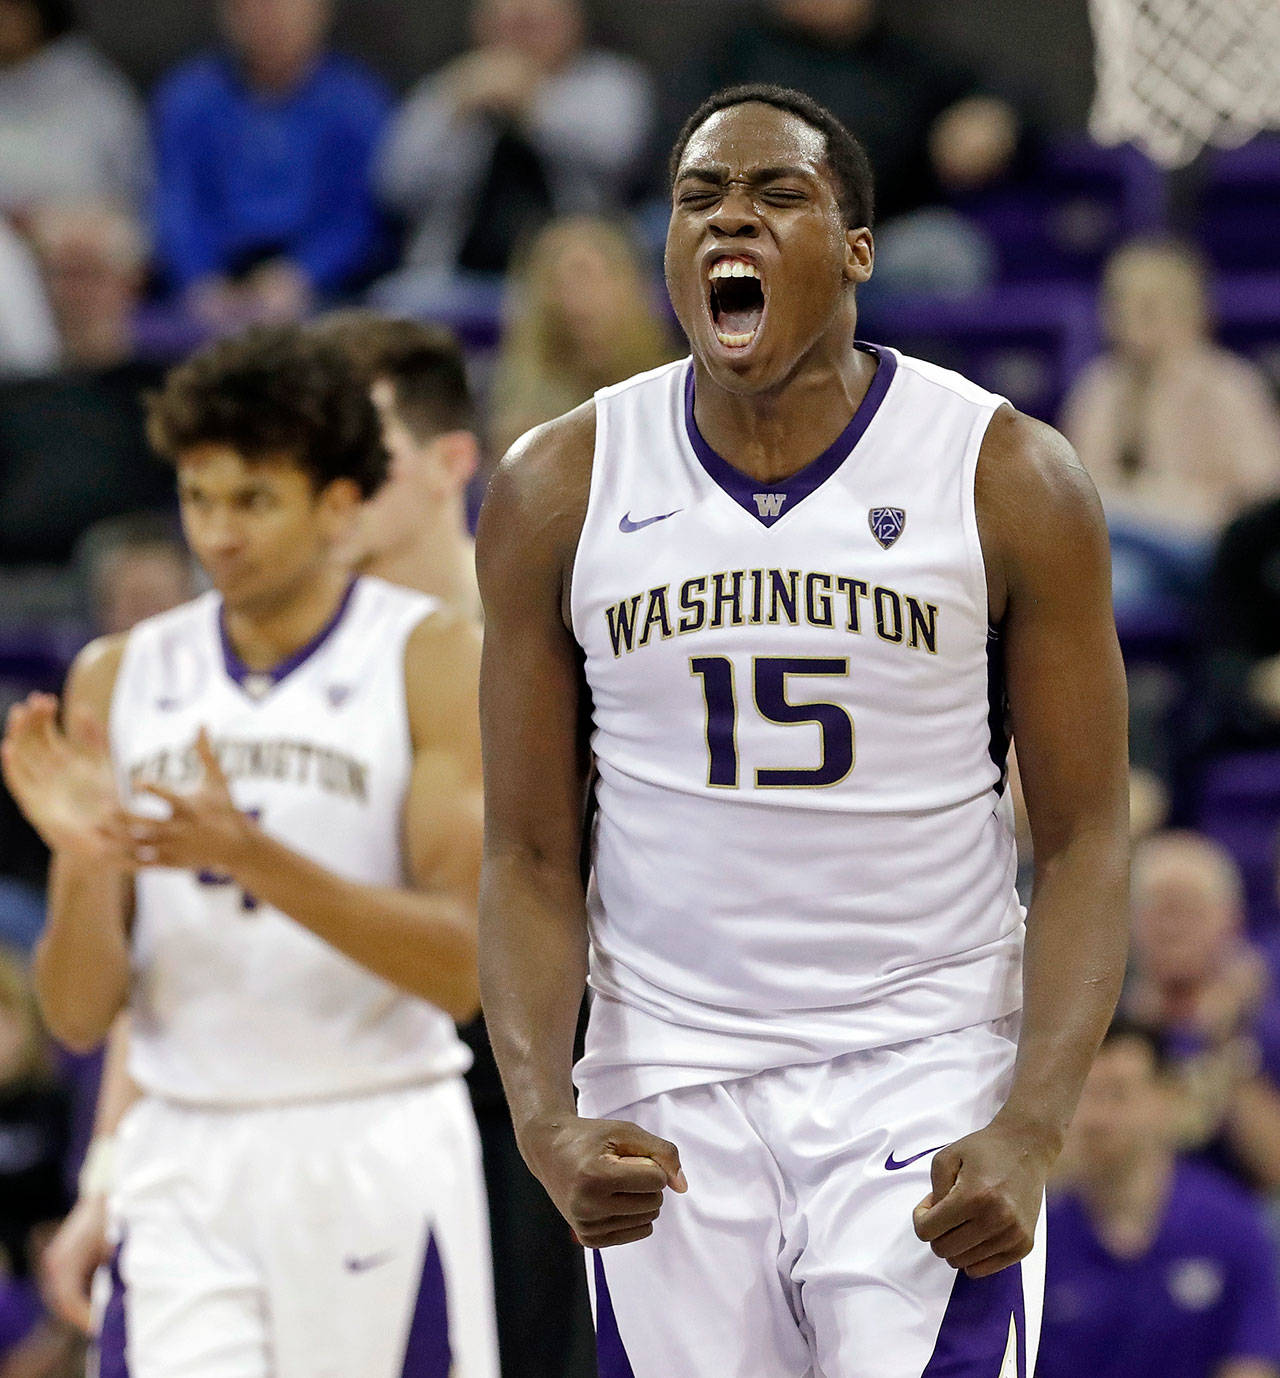 Washington’s Noah Dickerson (15) lets out a yell after a call against Oregon State during the second half of a game March 1, 2018, in Seattle. Washington won 79-77. (AP Photo/Elaine Thompson)